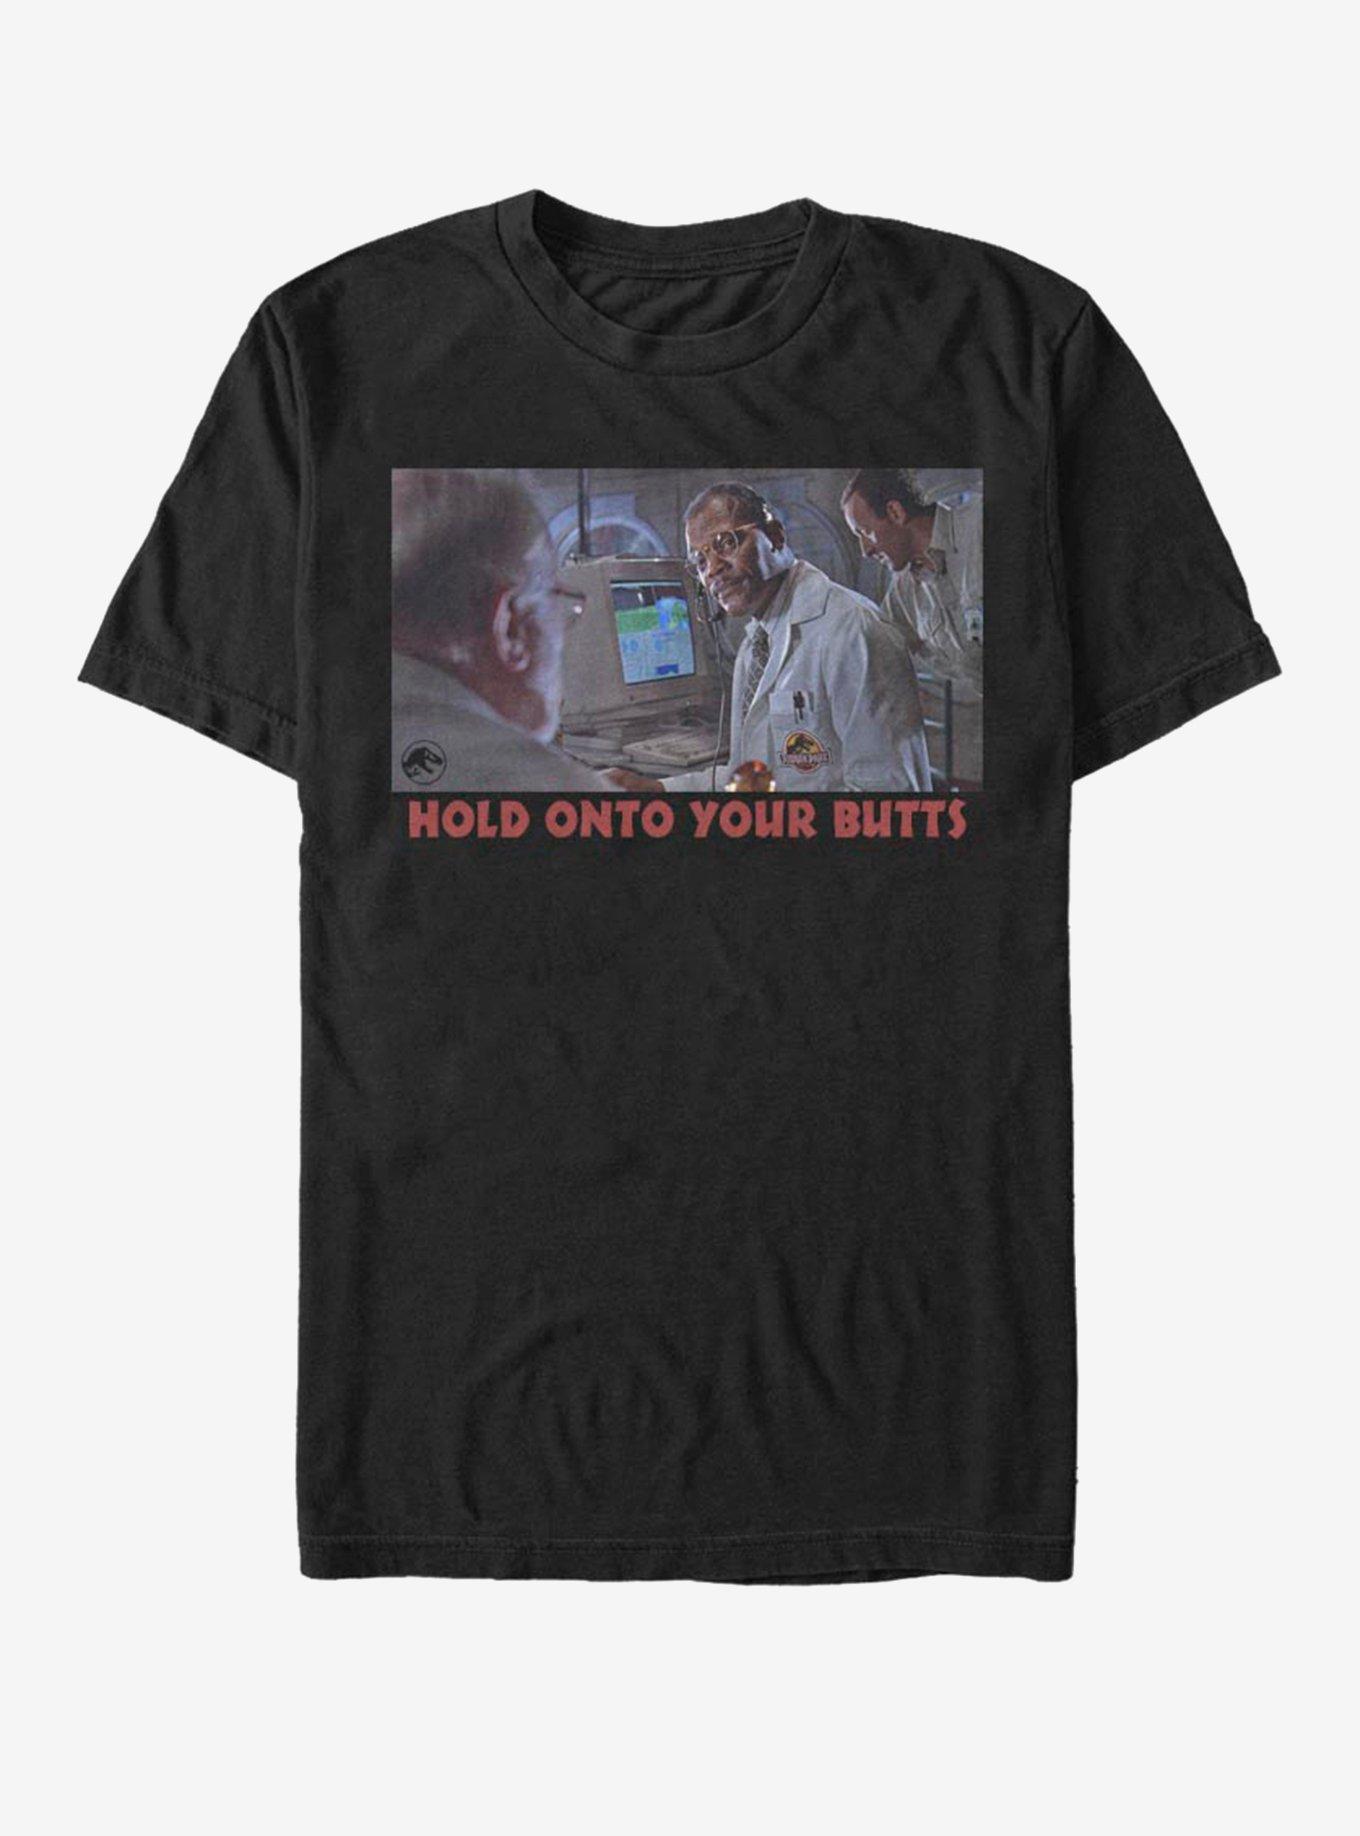 Jurassic Park Hold Onto Your Butts T-Shirt, BLACK, hi-res